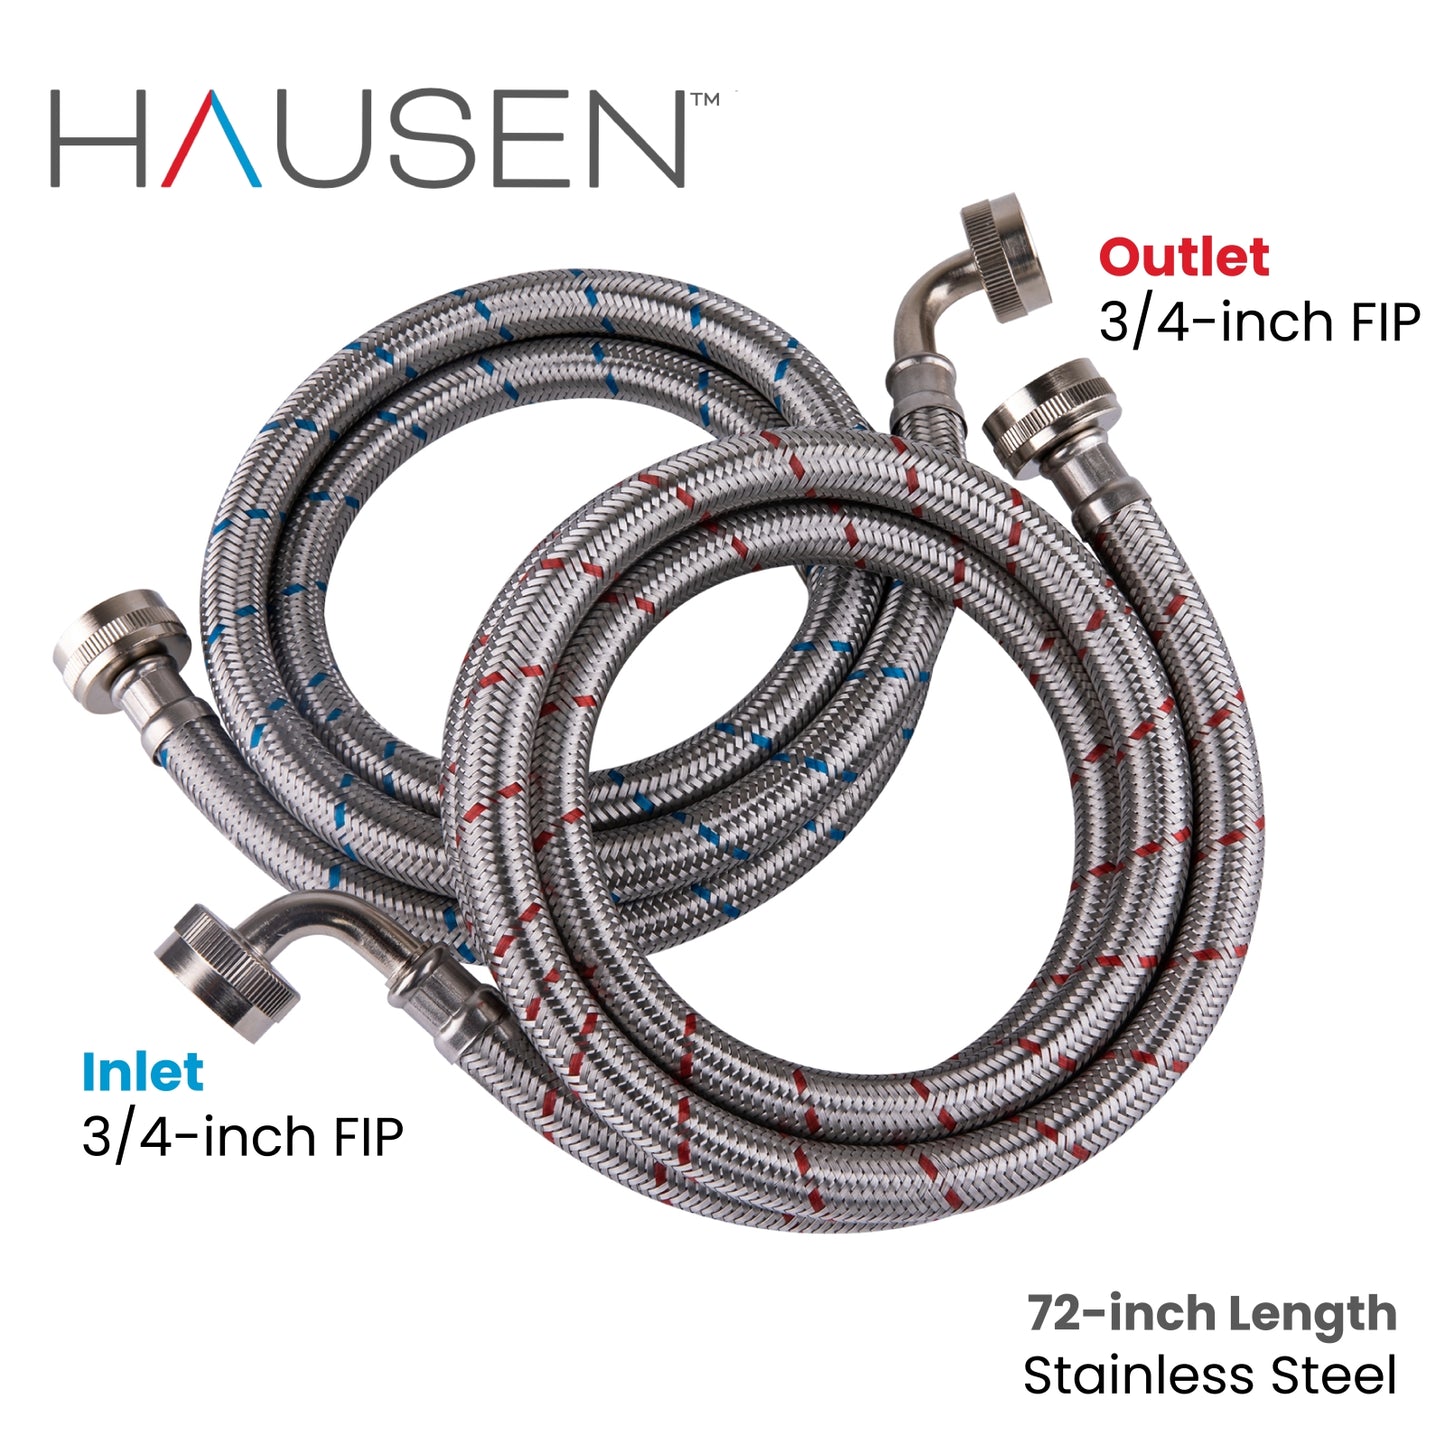 Hausen 3/4-inch FIP (Female Iron Pipe) x 3/4-inch FIP (Female Iron Pipe) x 72-inch (6-Feet) Length Stainless Steel Washing Machine Water Supply Connector with Elbow; For Cold & Hot Water Connections, 1-Pack